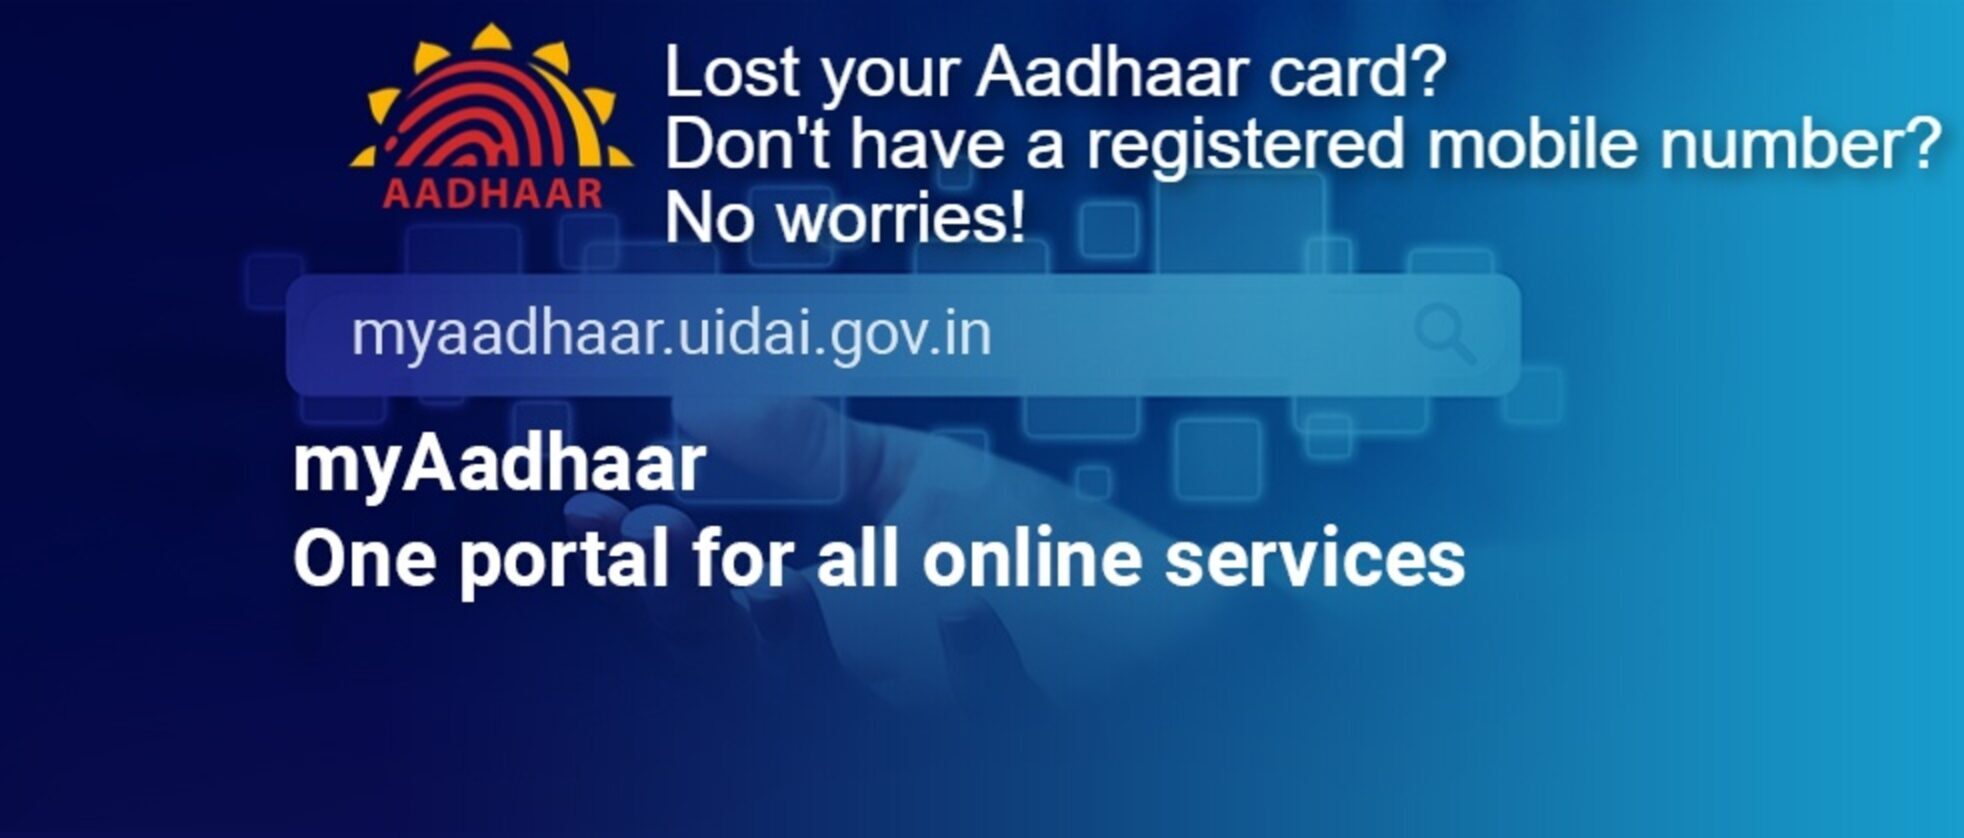 Lost your Aadhaar card and don't have a registered mobile number? No worries!